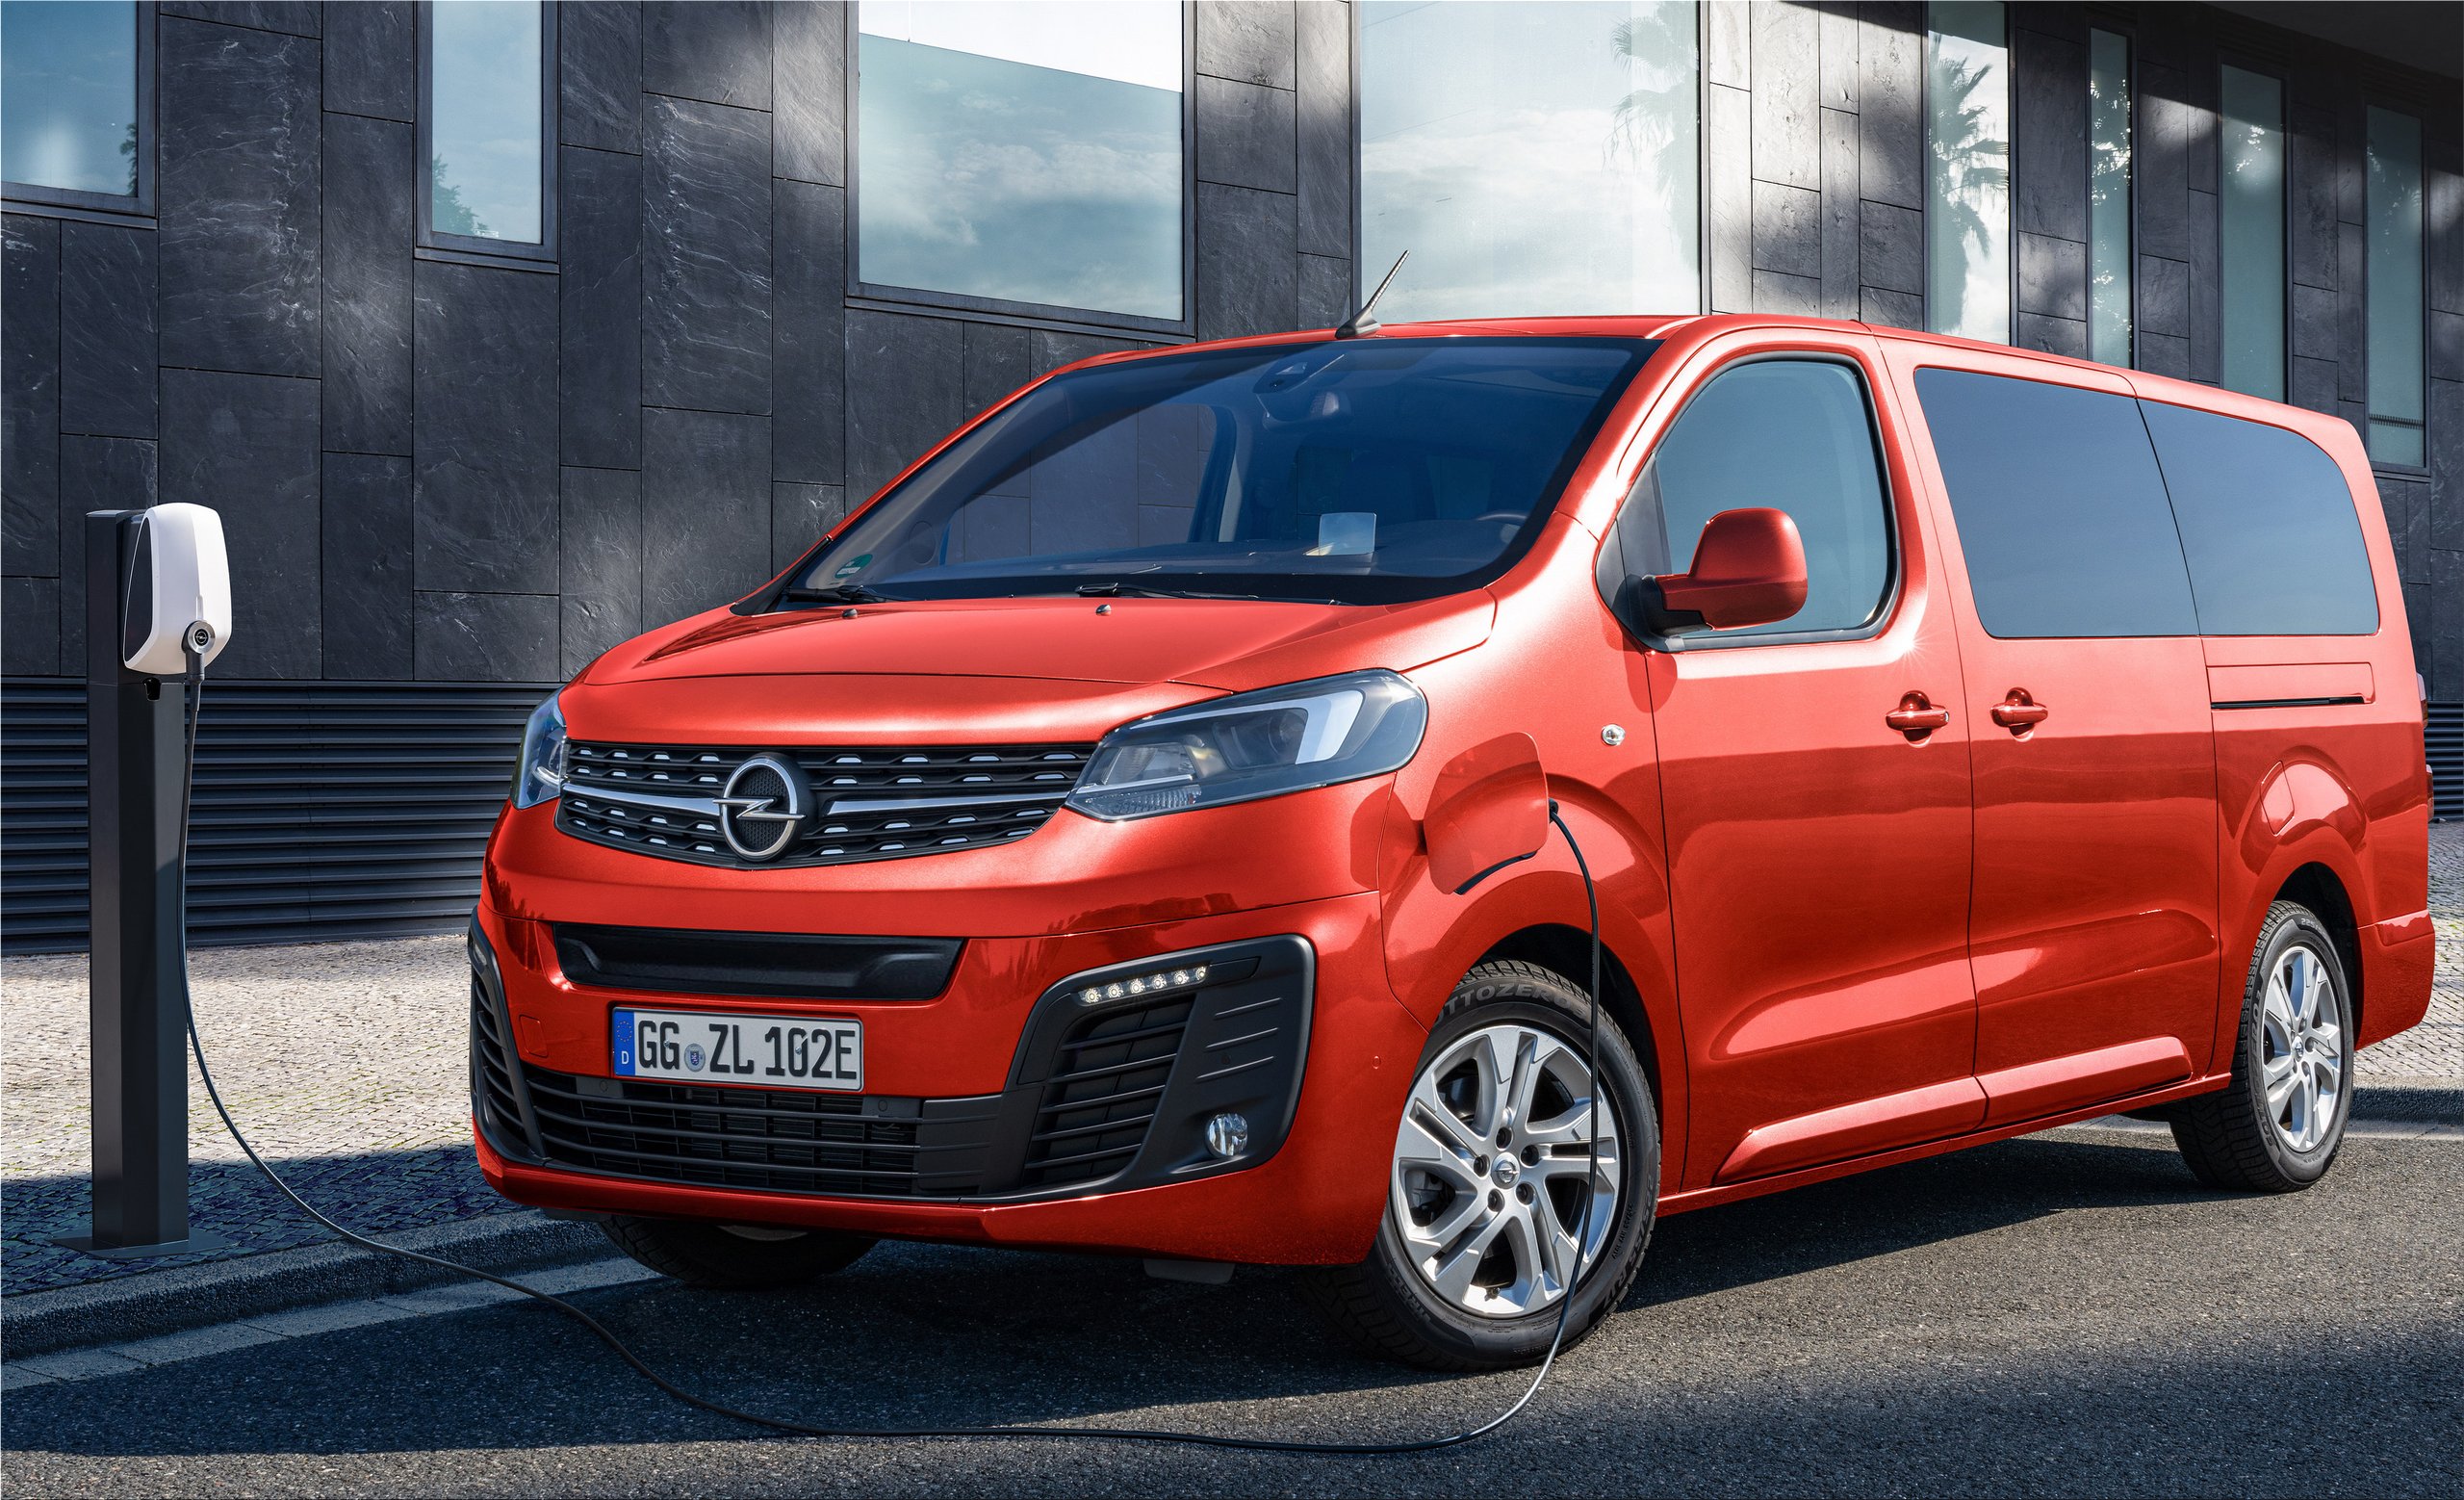 The new Opel Zafira-e Life with 136hp and a range of up to 330